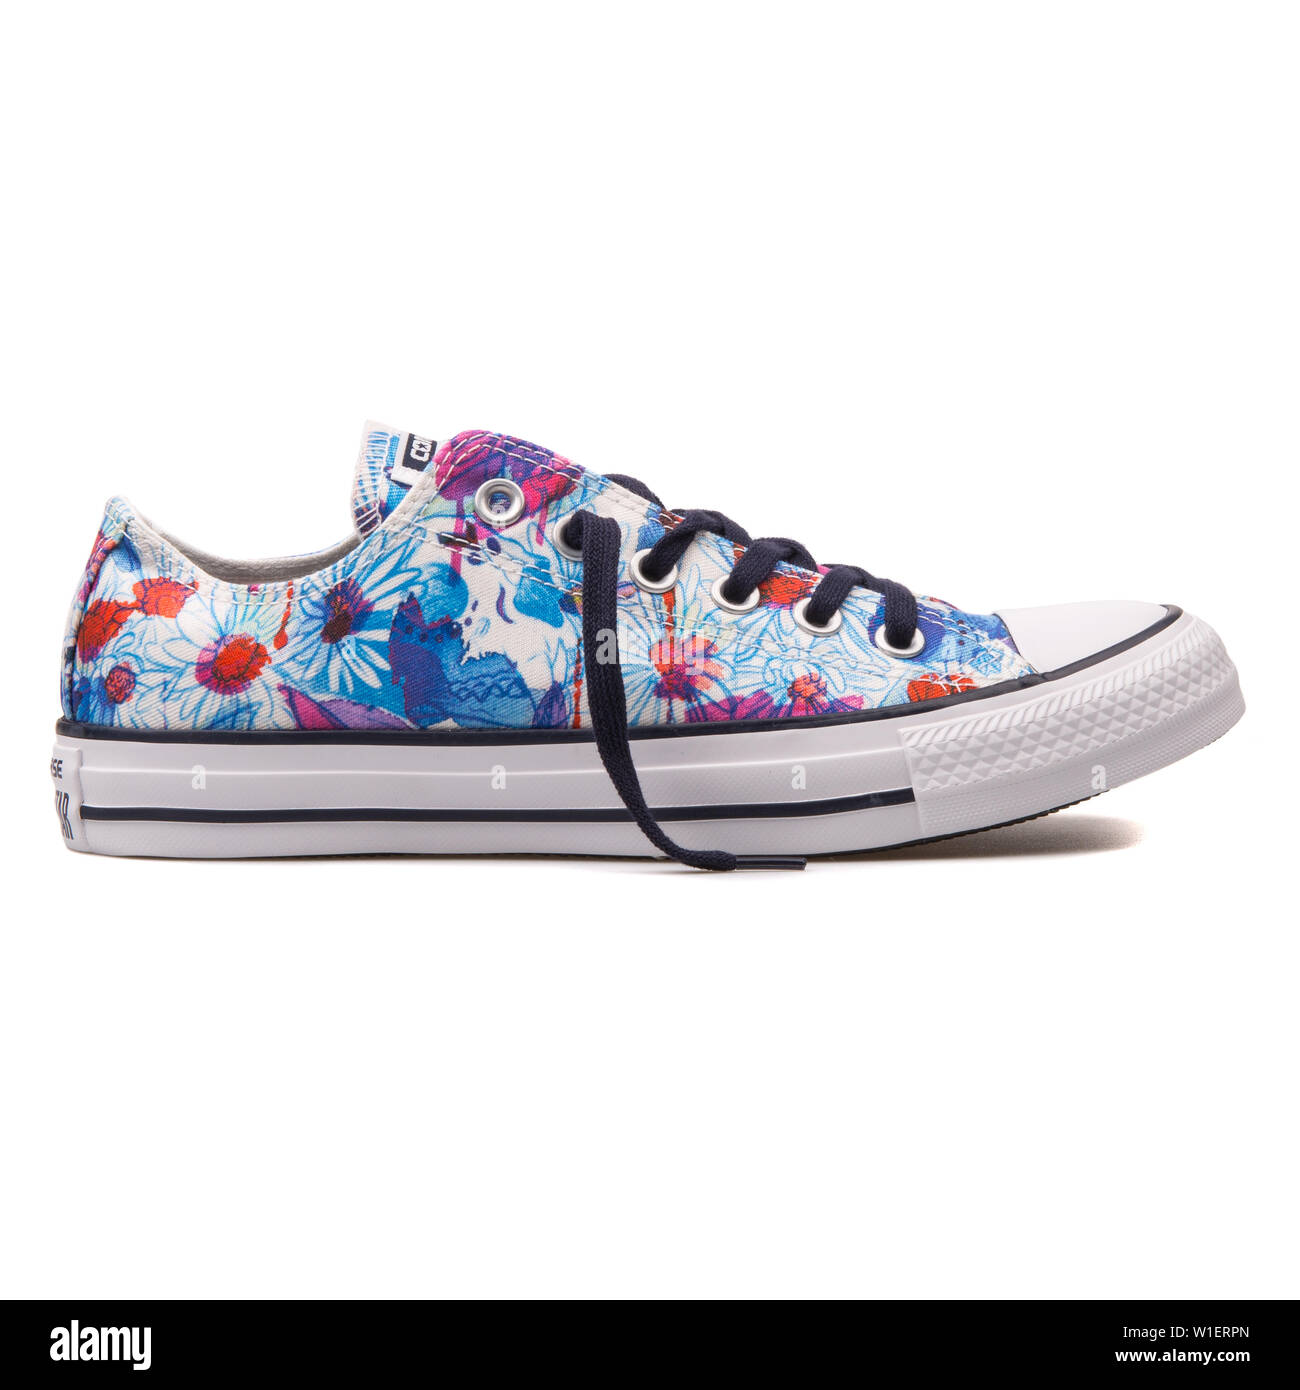 VIENNA, AUSTRIA - AUGUST 10, 2017: Converse Chuck Taylor All Star OX spray  paint floral sneaker on white background Stock Photo - Alamy